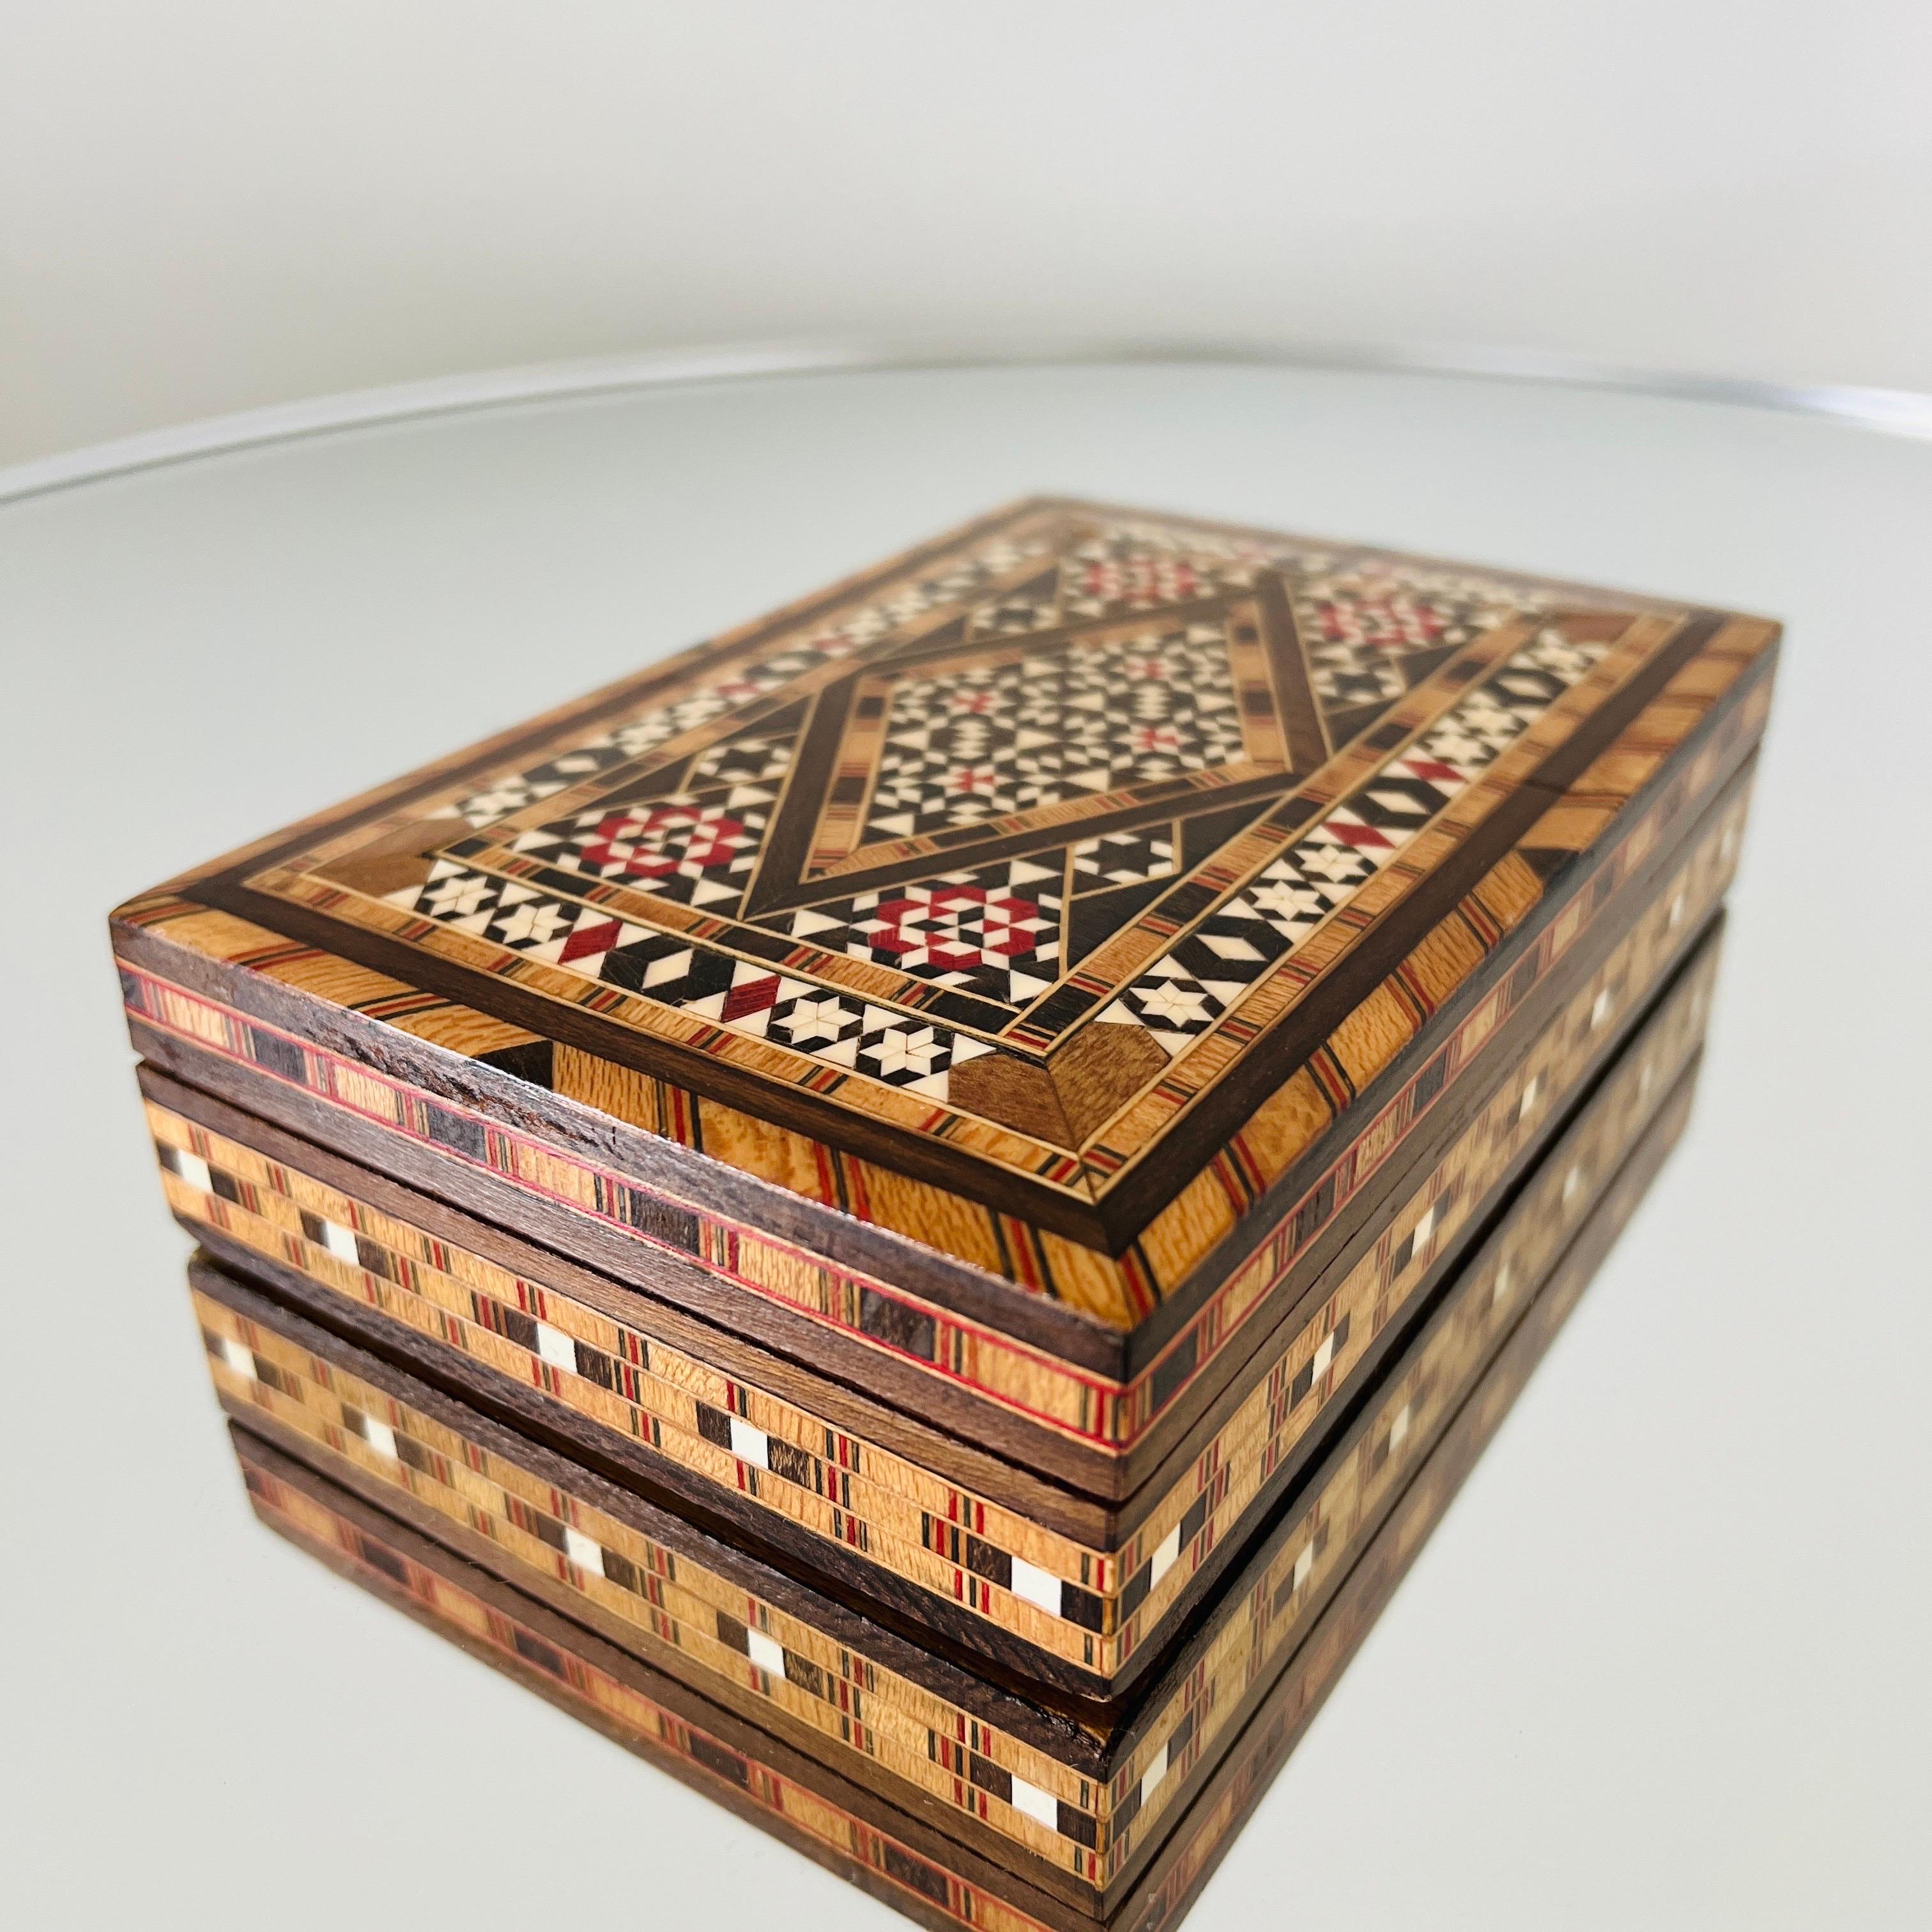 Late 20th Century Marquetry Wood Box with Mosaic Bone Inlays, Middle East. c. 1970's For Sale